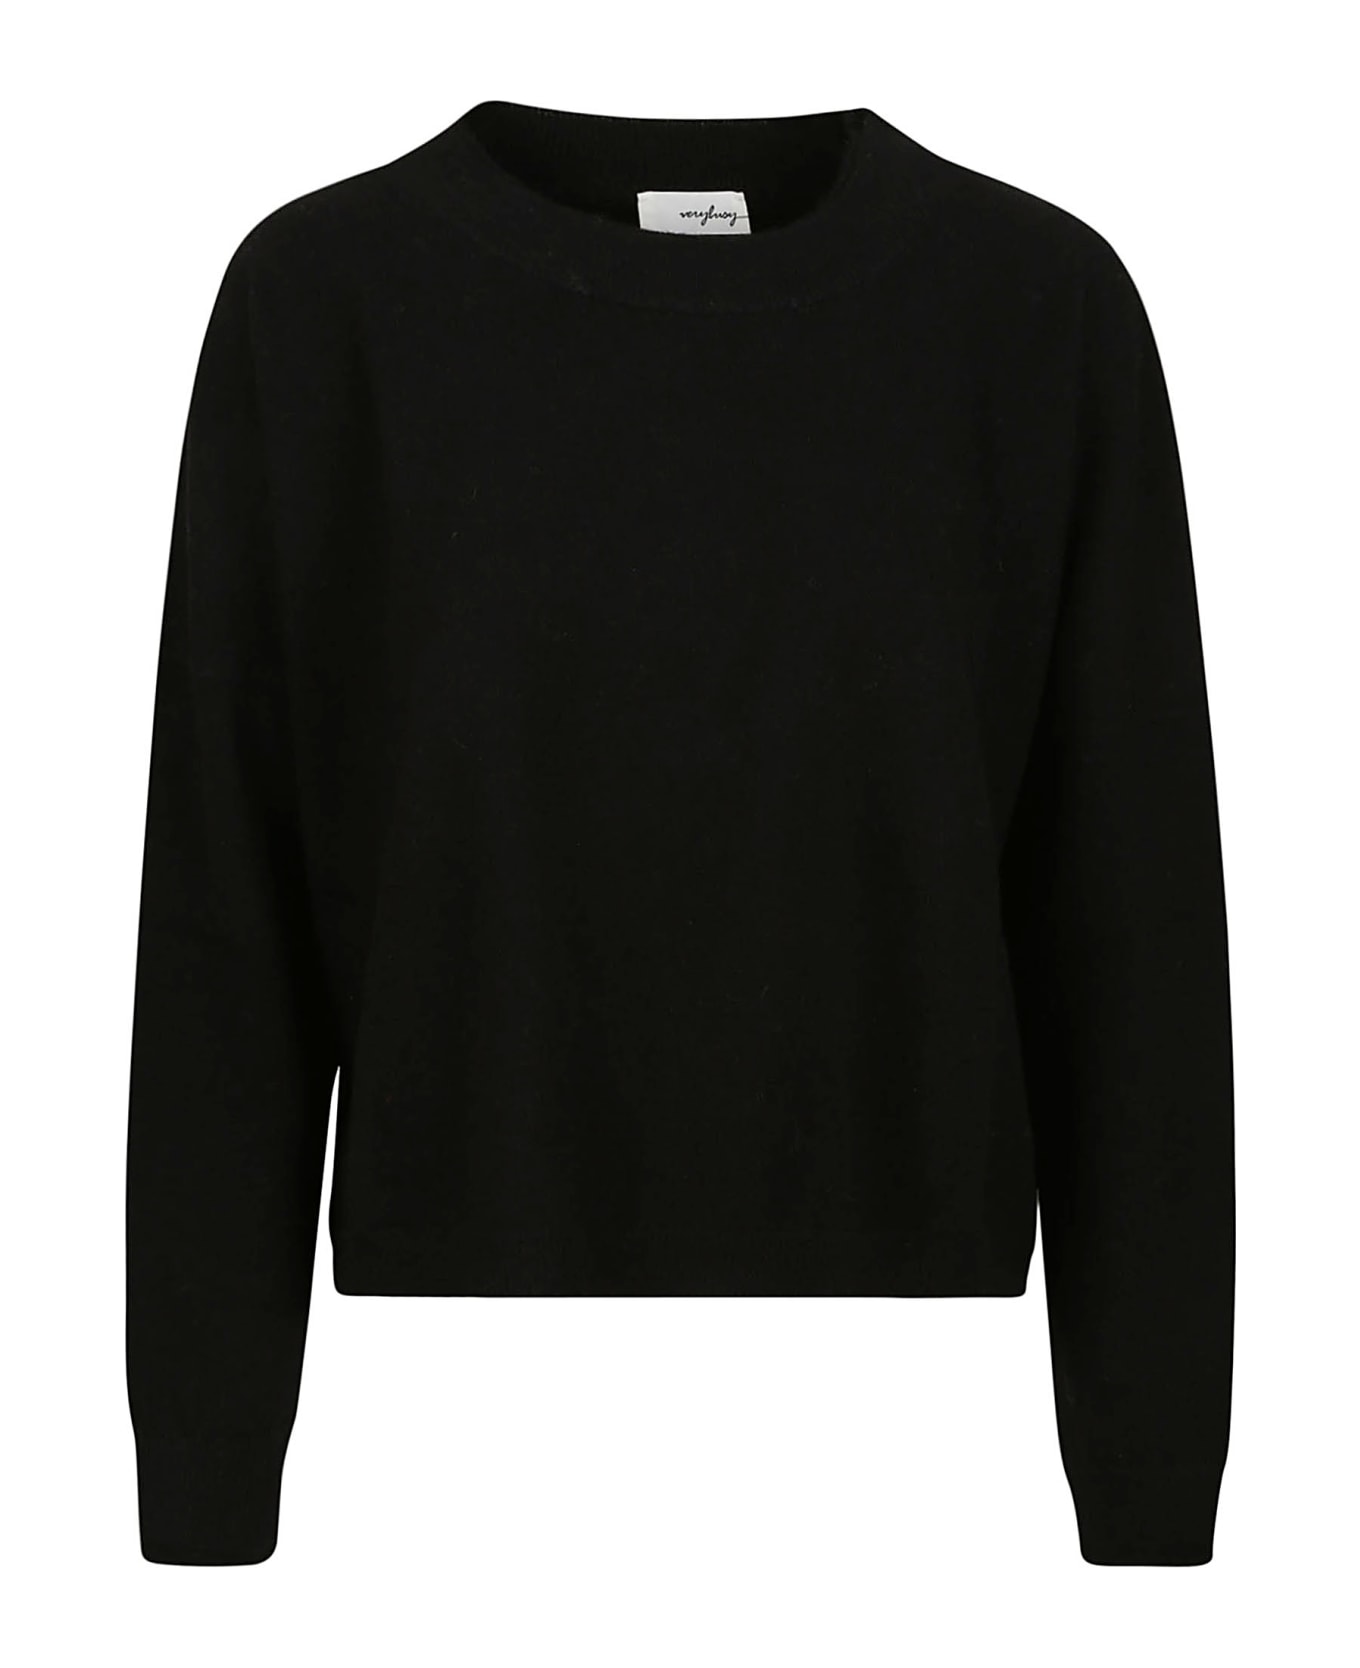 Verybusy Very Busy Sweaters Black - Black